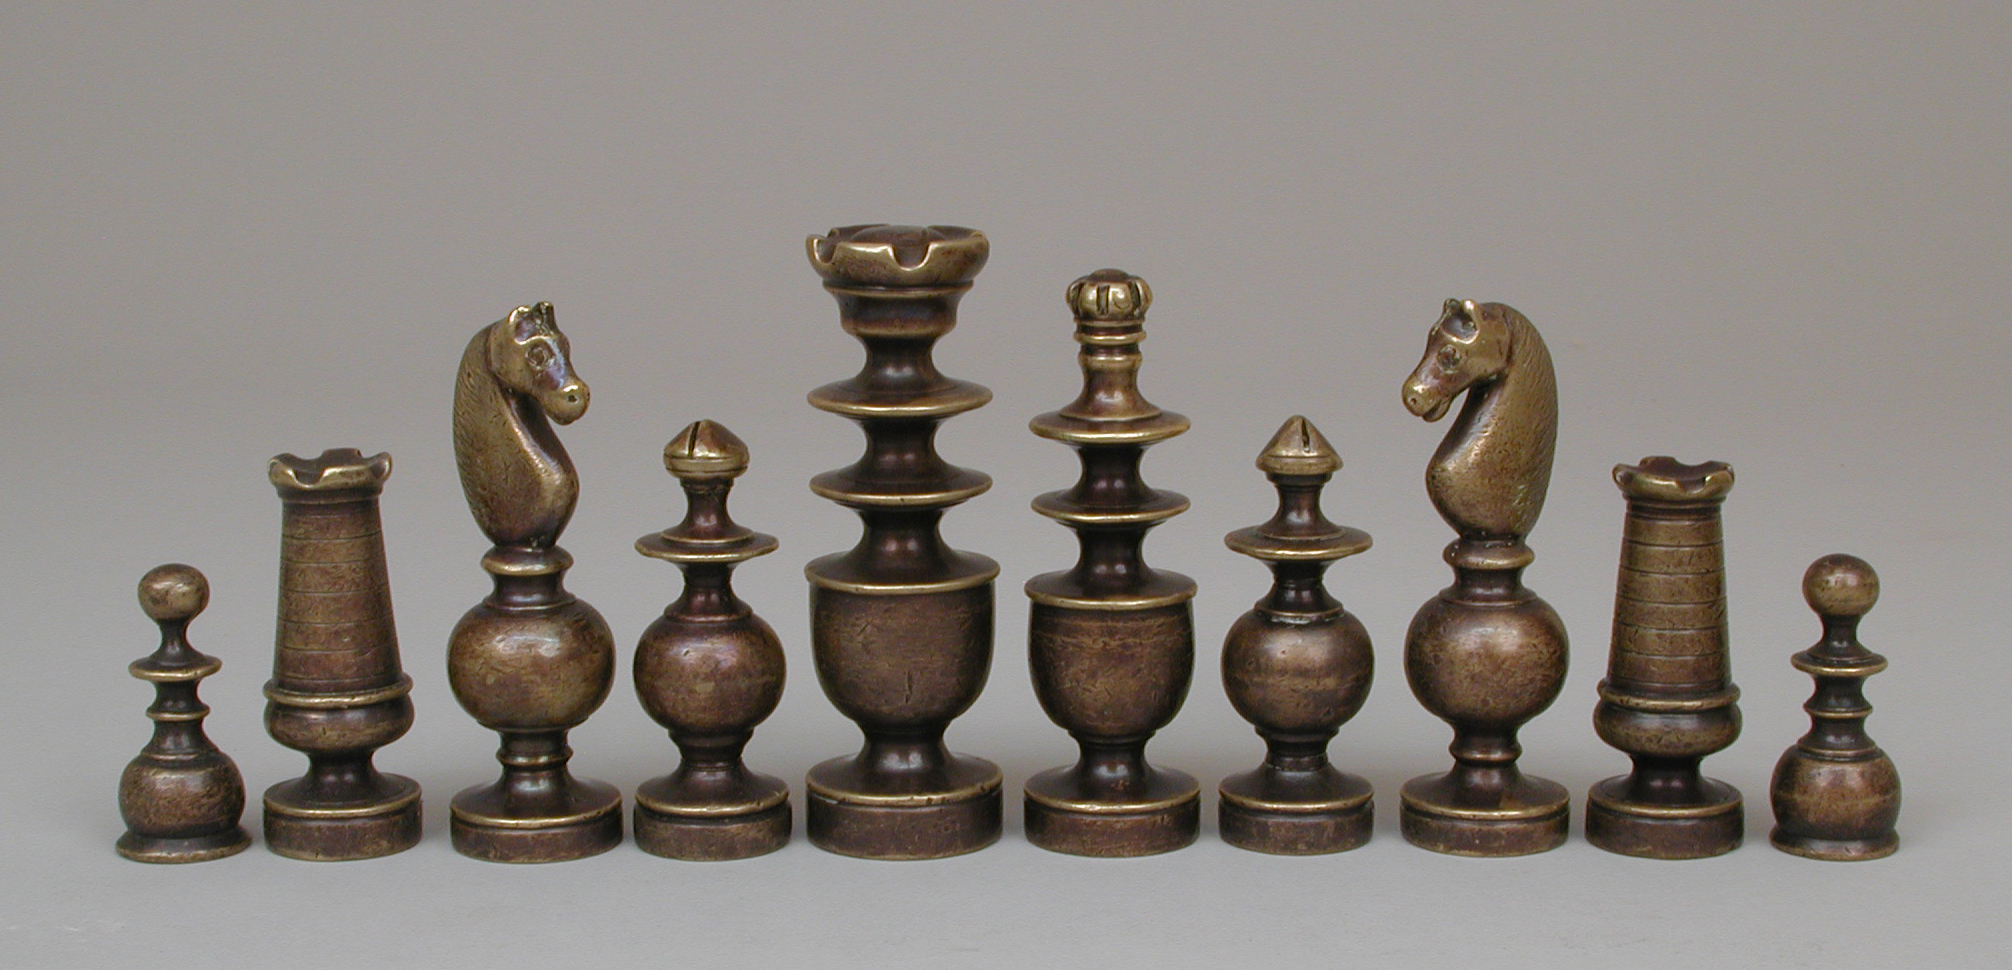 Regency Chess Sets - Welcome to the Chess Museum